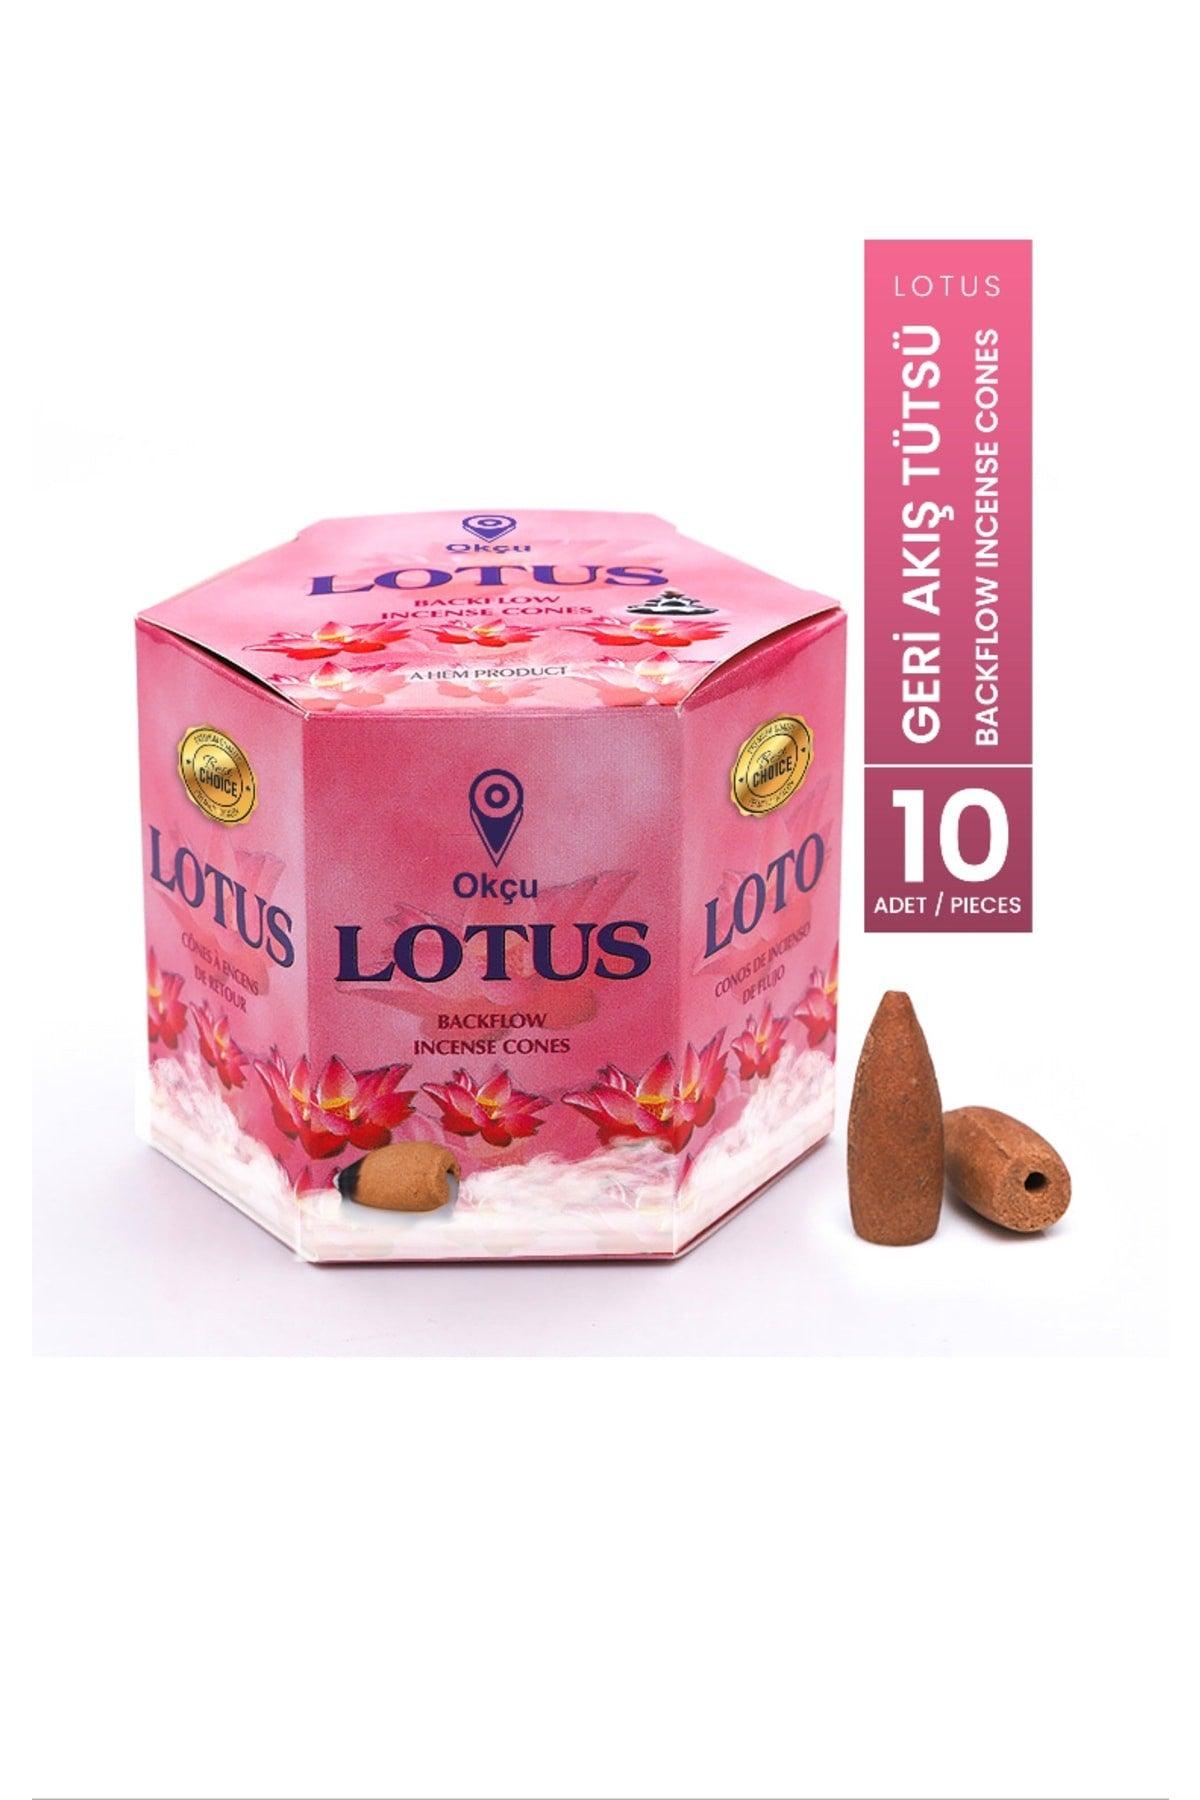 Lotus Lotto Backflow Incense Waterfall Conical Backflow Incense Cones 10 Pcs / Cones - Swordslife